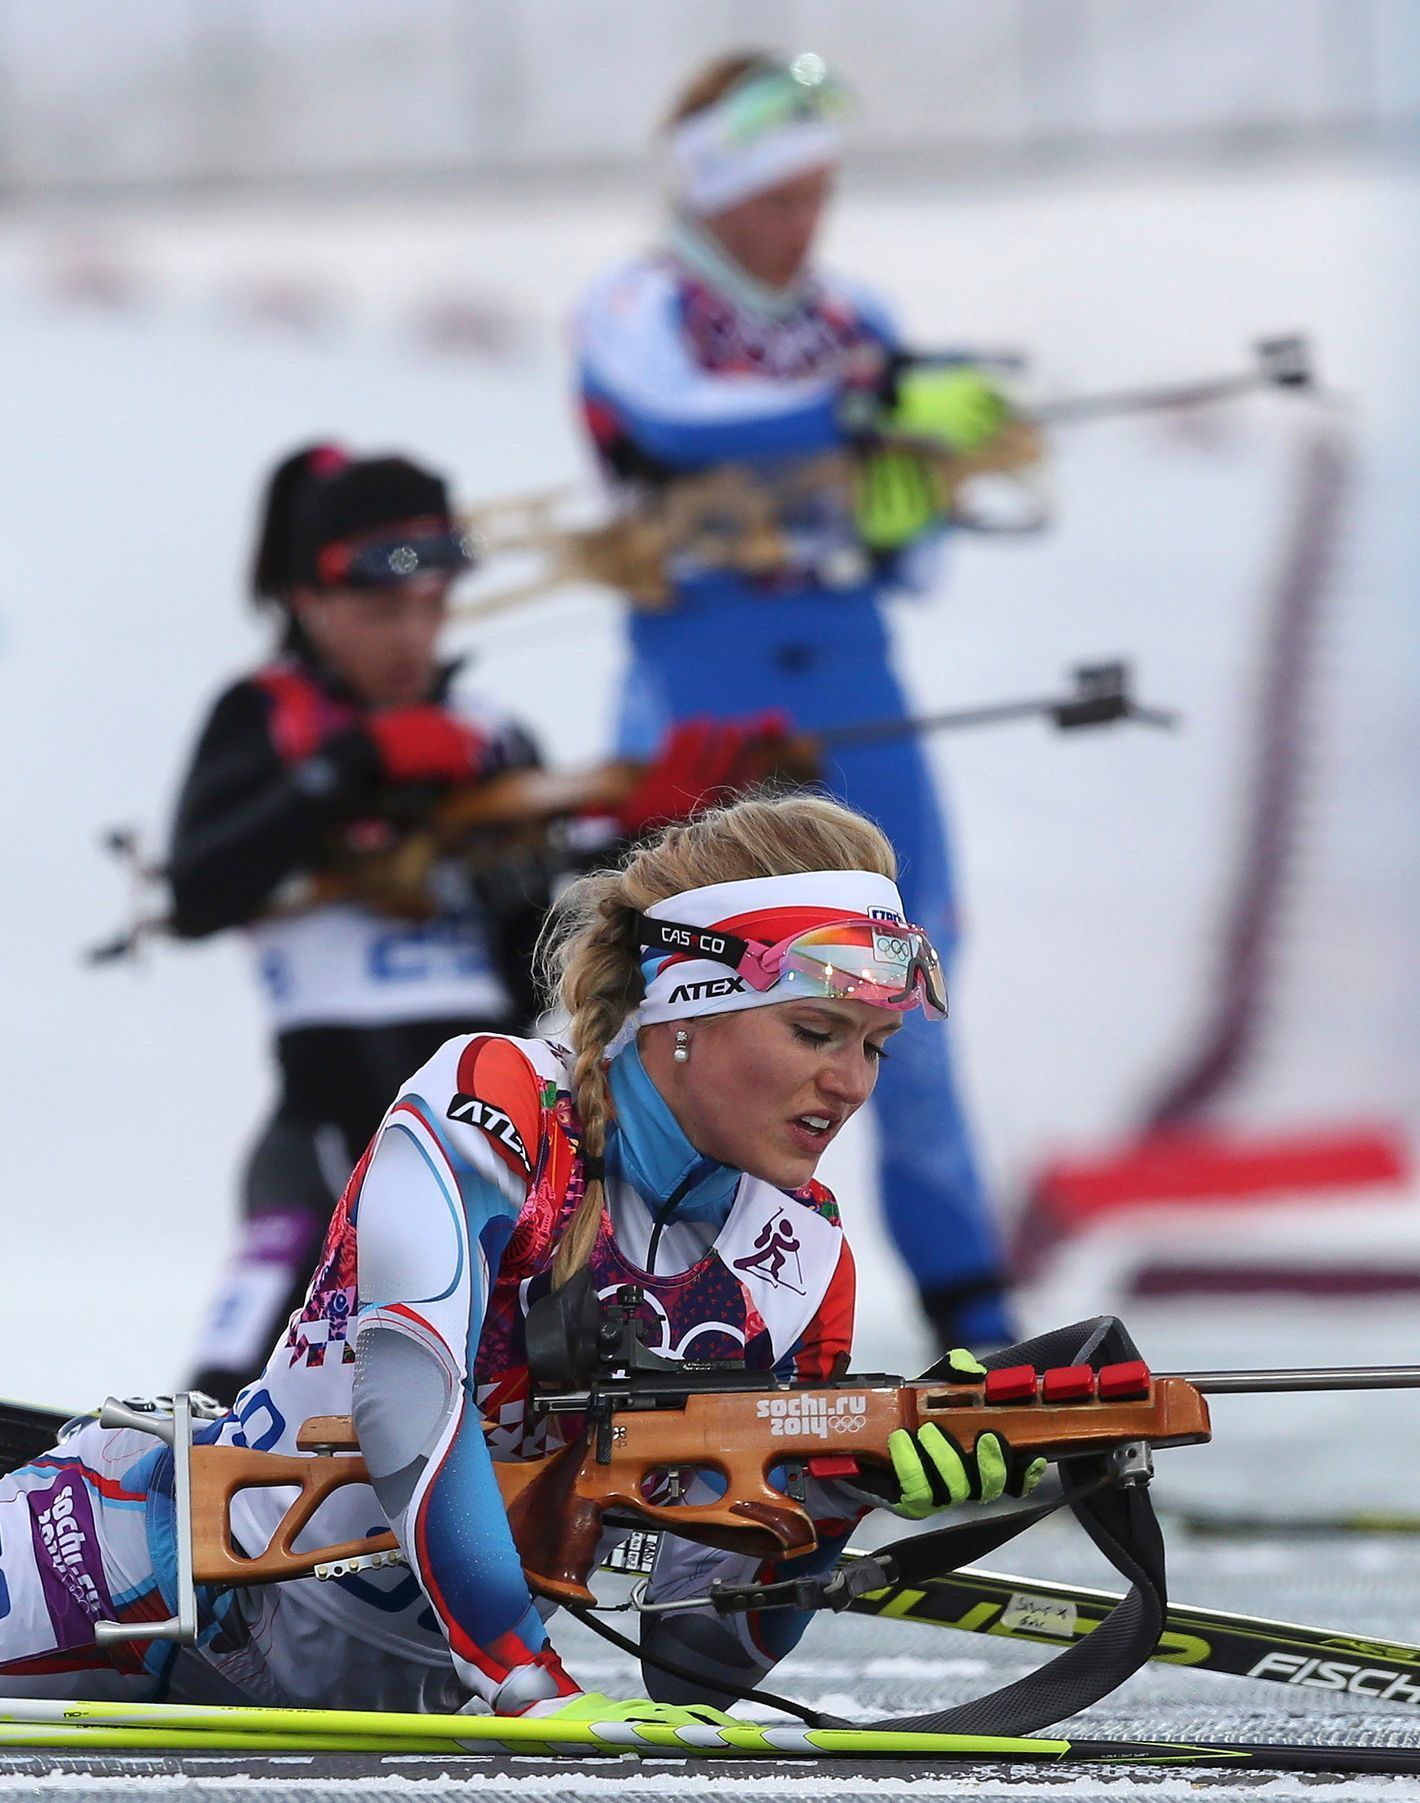 Czech Republic's Soukalova prepares to shoot during the women's biathlon 15km individual event at the Sochi 2014 Winter Olympic Games in Rosa Khutor